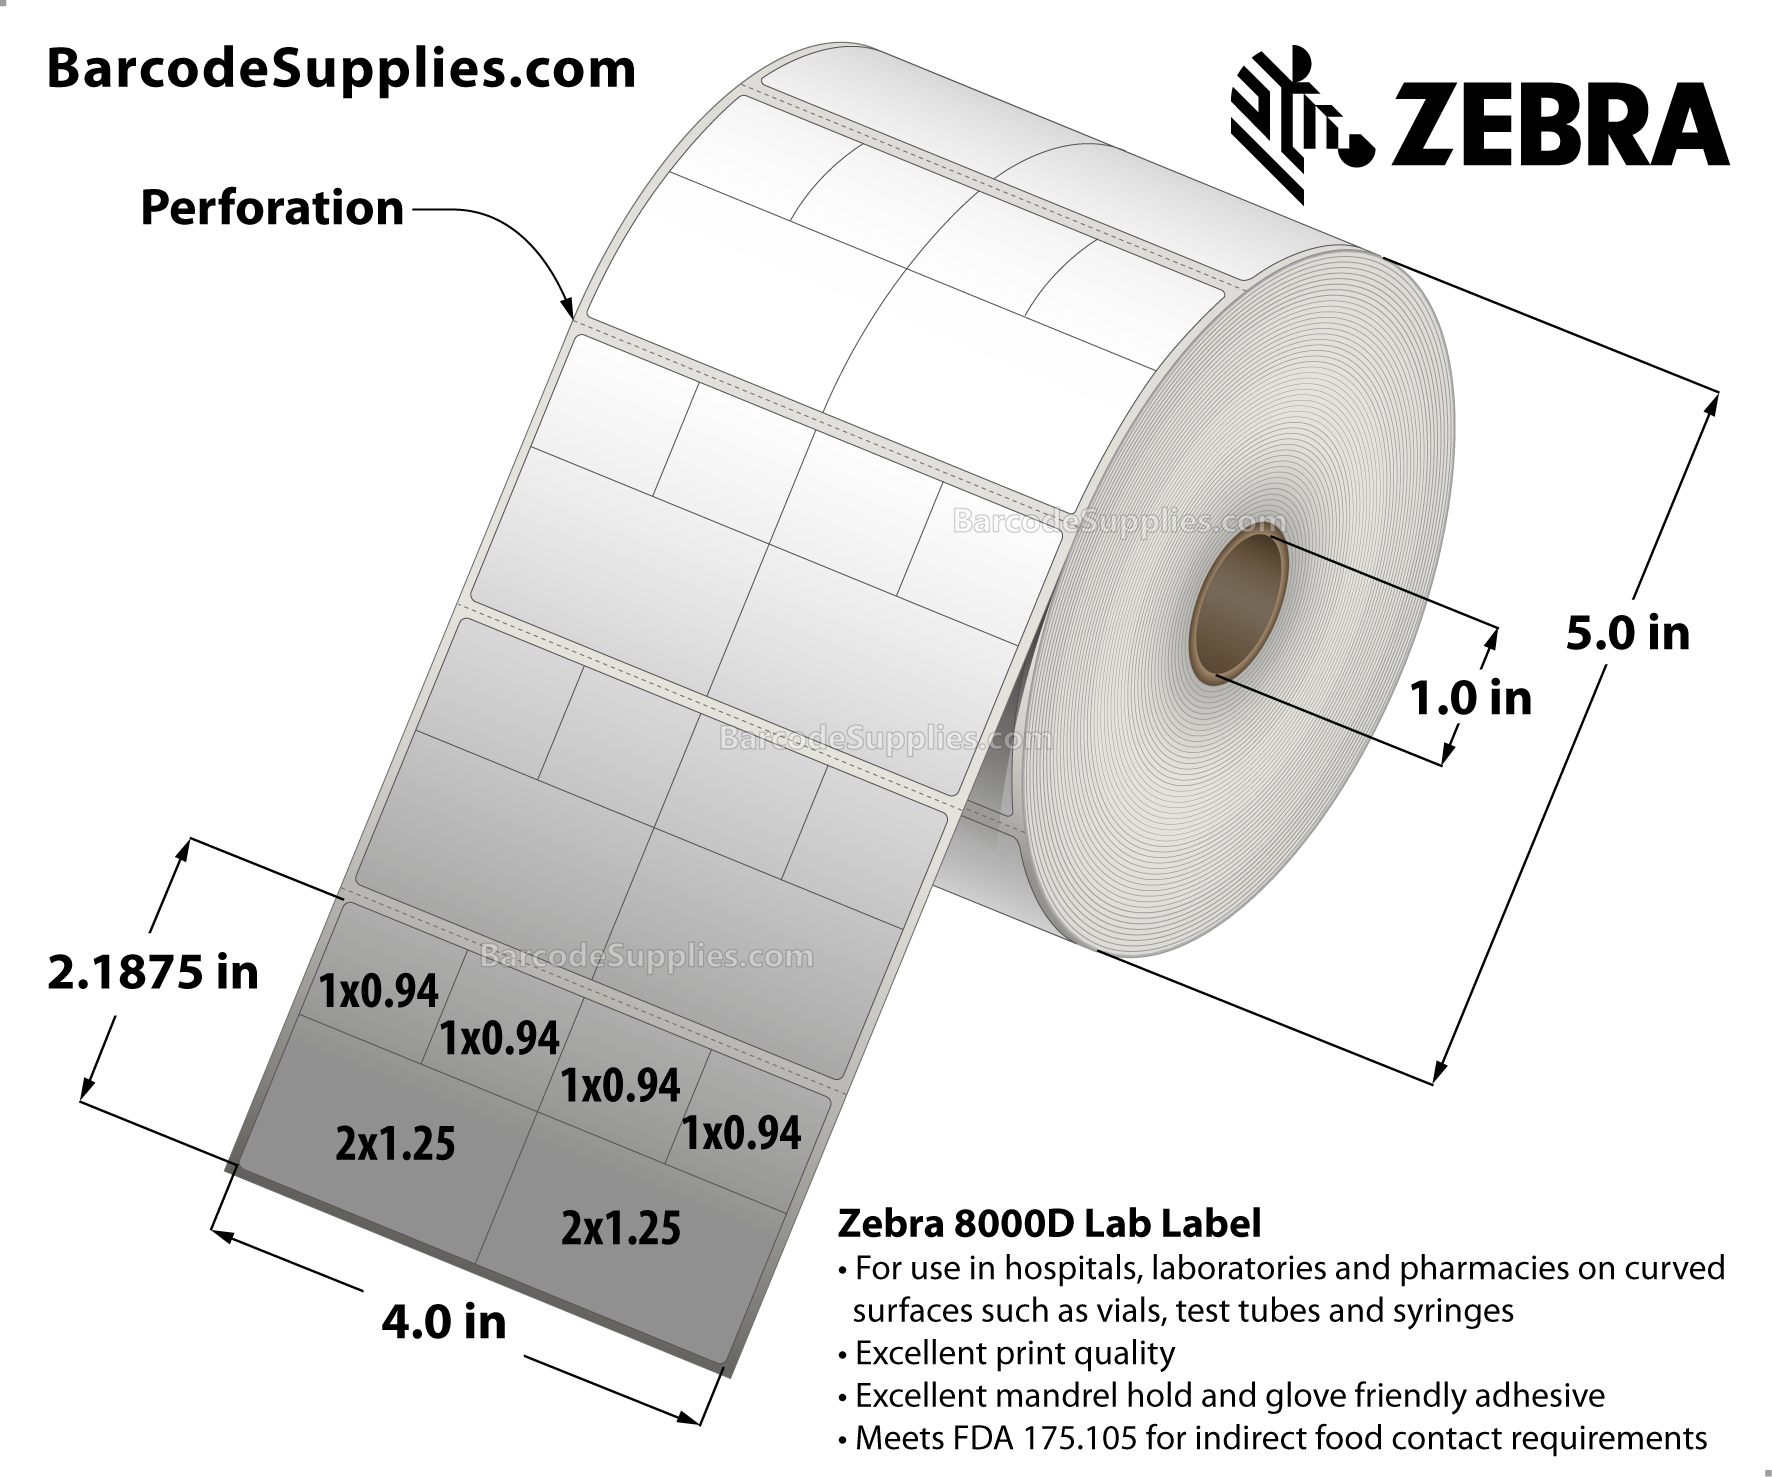 4 x 2.1875 Direct Thermal White 8000D Lab Labels With Permanent Adhesive - Slits through facestock create six labels: (4) 1x0.9375 labels and (2) 2x1.25 labels - Perforated - 1000 Labels Per Roll - Carton Of 2 Rolls - 2000 Labels Total - MPN: 10026376